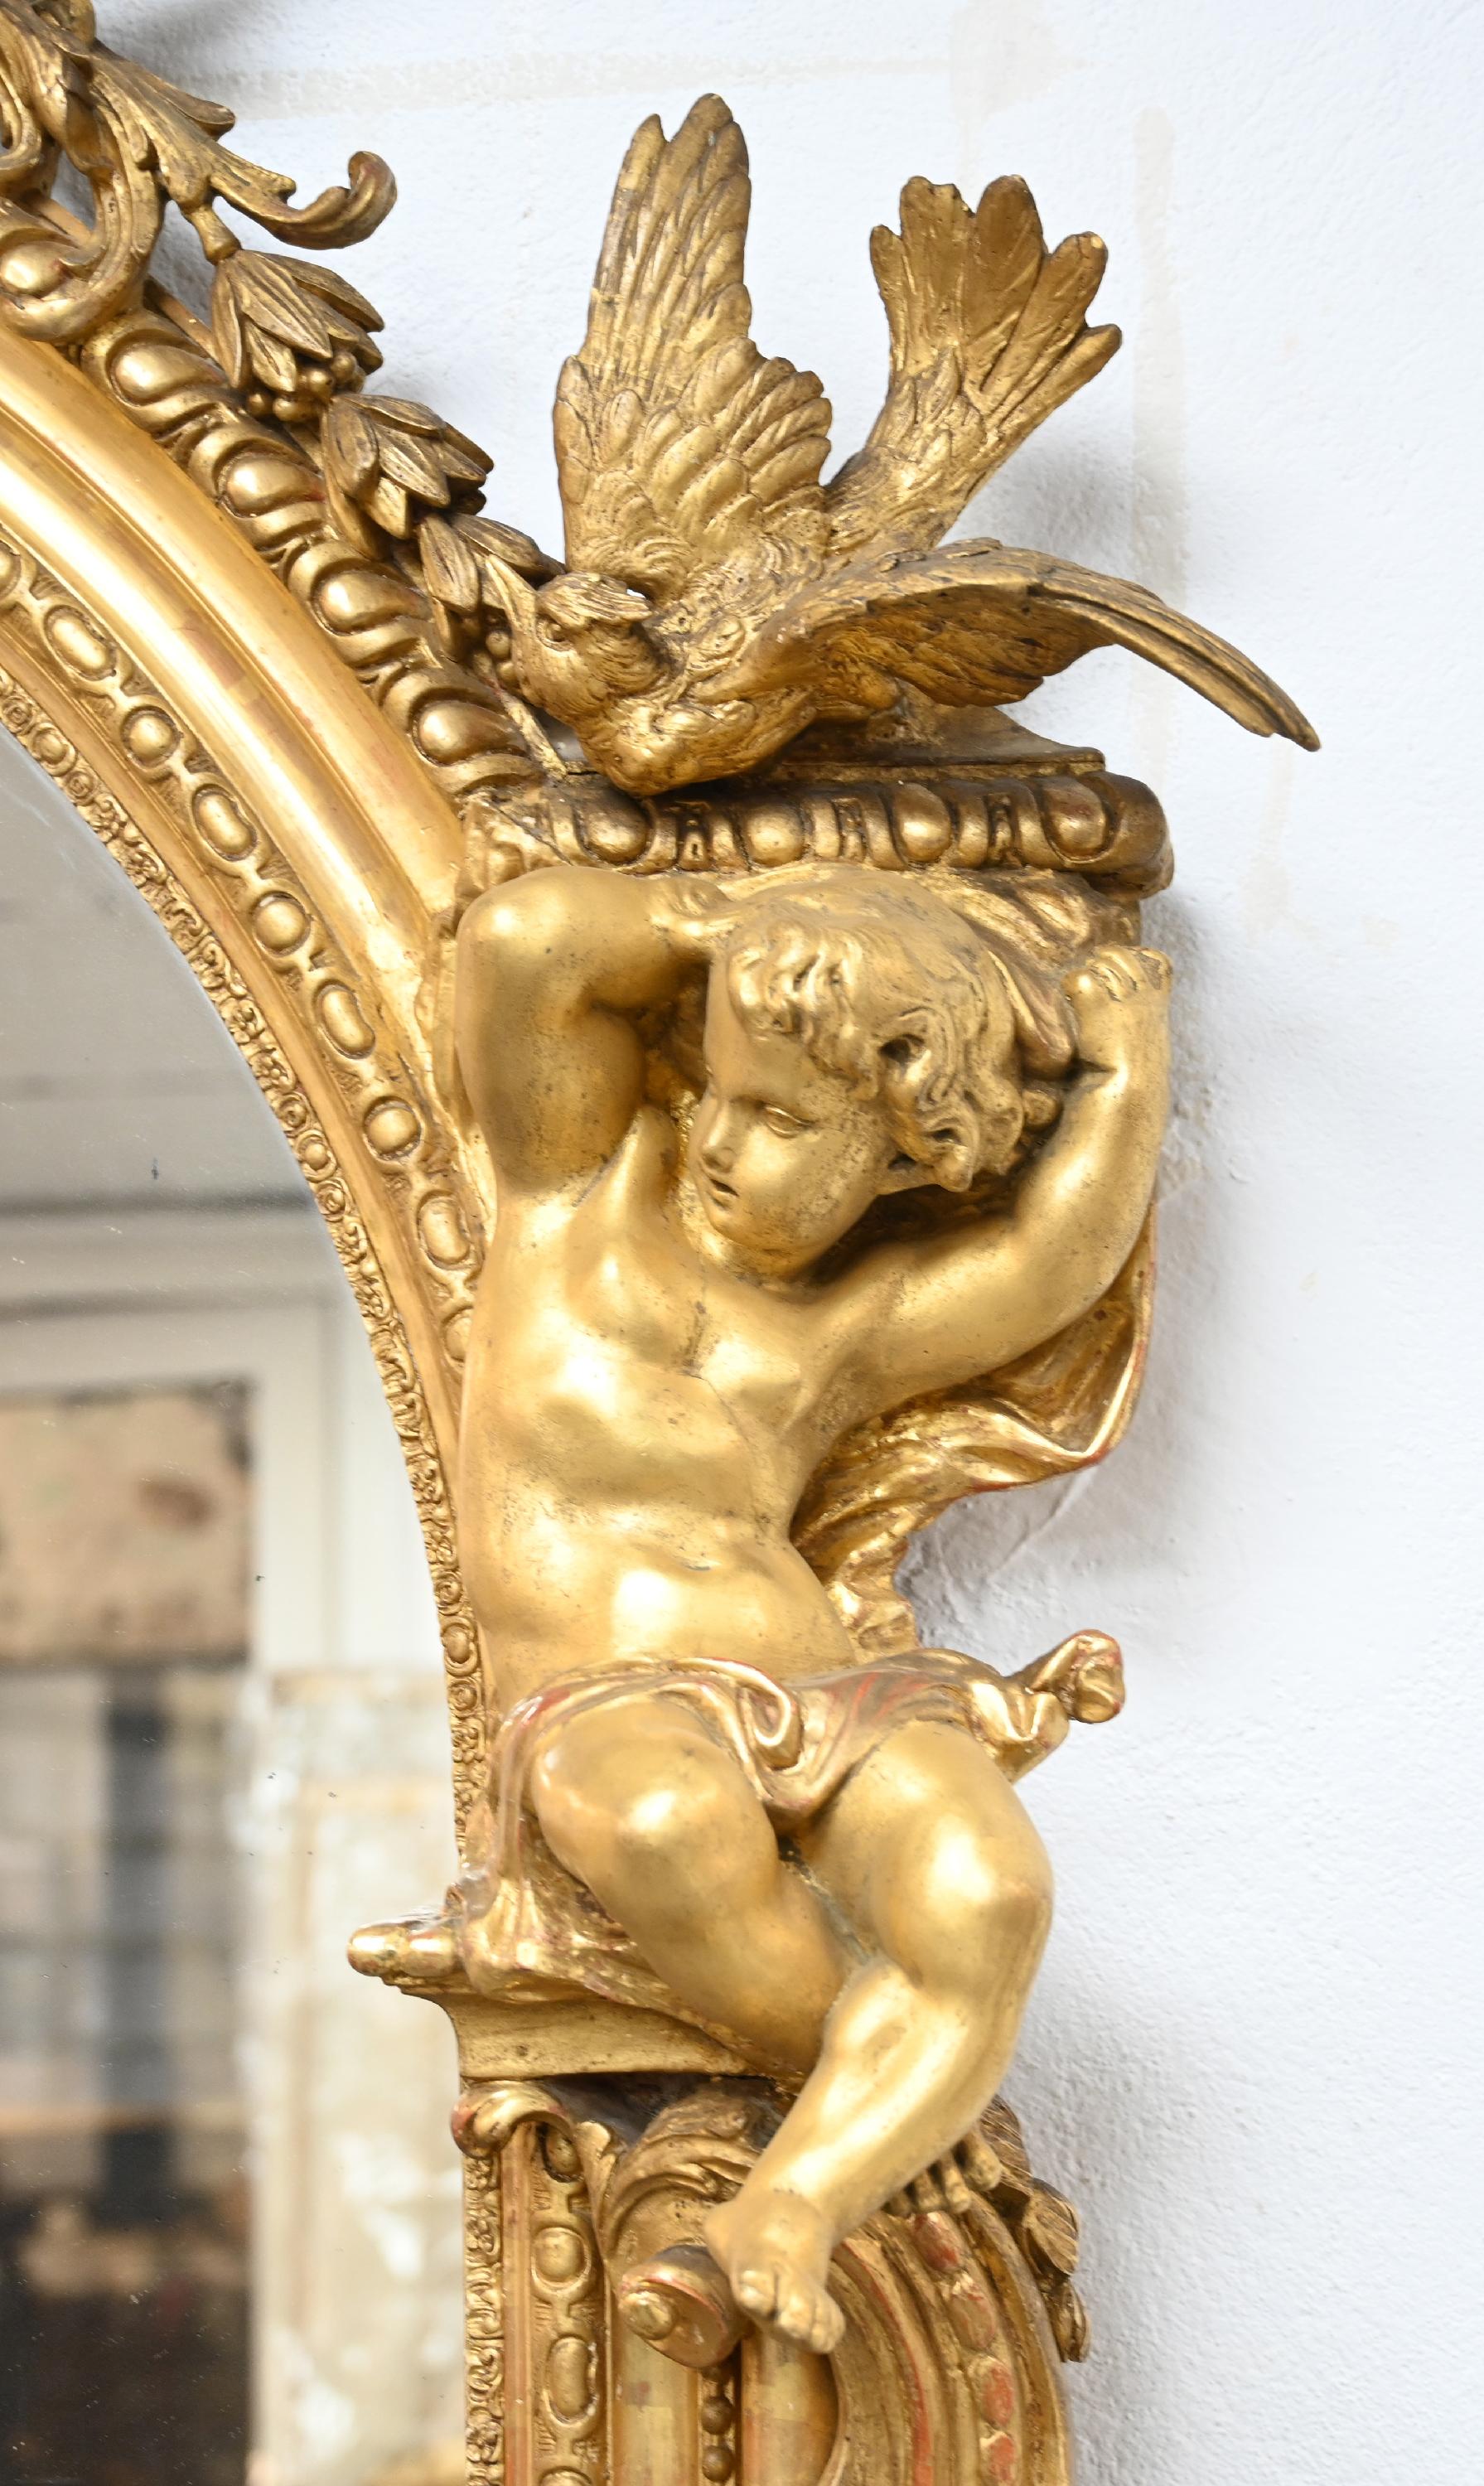 Large Gilded Trumeau with Birds, Putti and Woman’s Face on Openwork Decoration 1